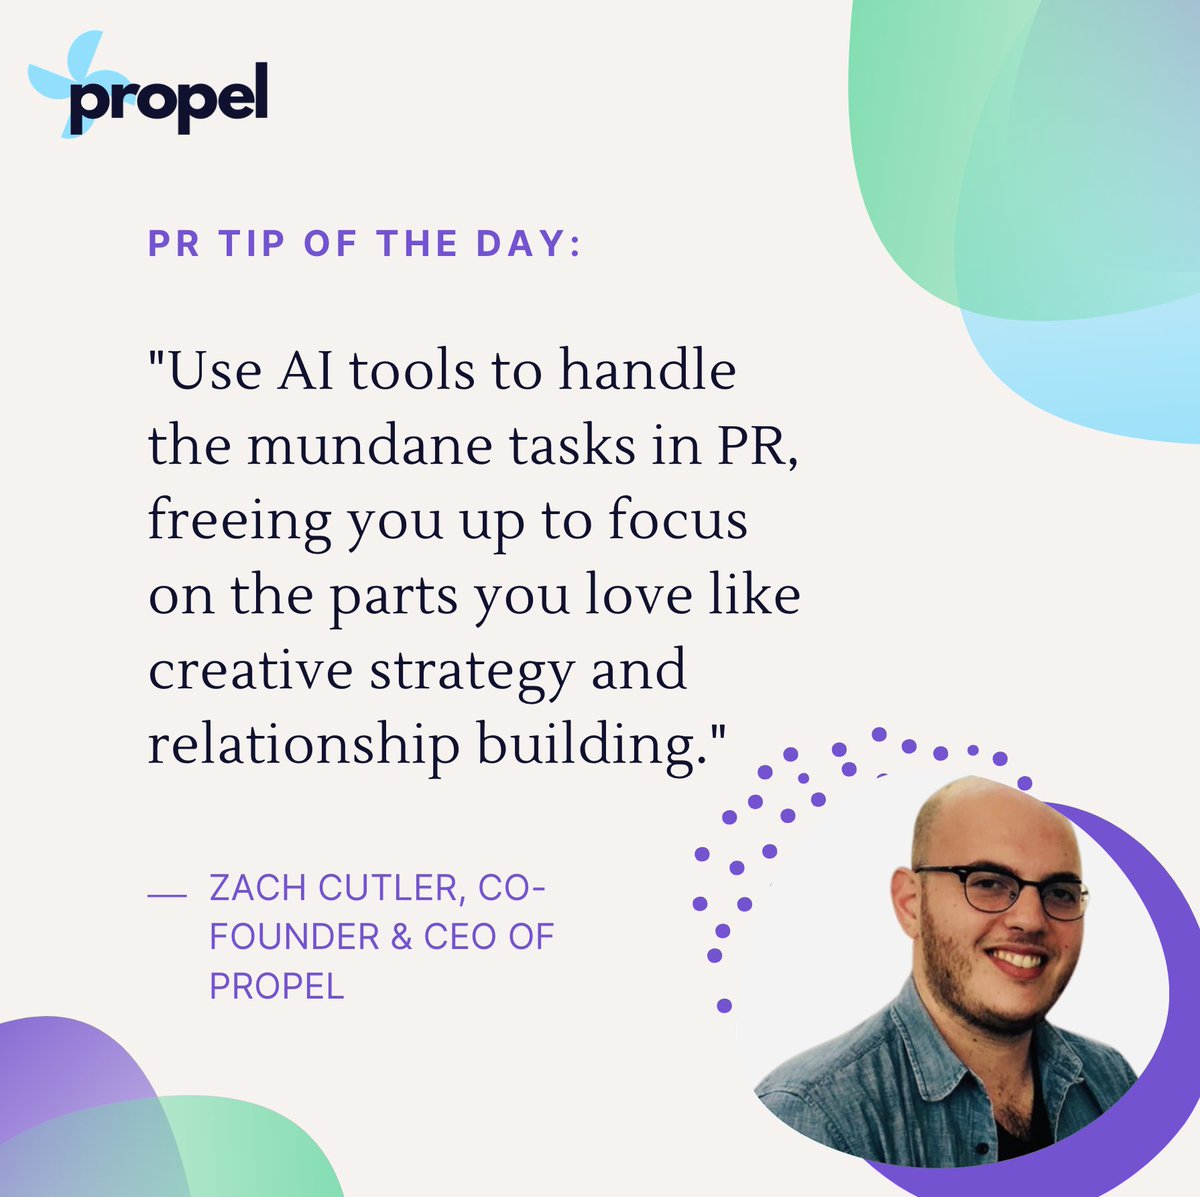 As a #PR pro, you know best that the little tasks can add up & drain your time and energy. 

Let AI handle the repetitive work so you can focus on what really matters - creative strategy and building relationships! ❤️

@ZachMCutler 

#PRtips #AItools #commspros